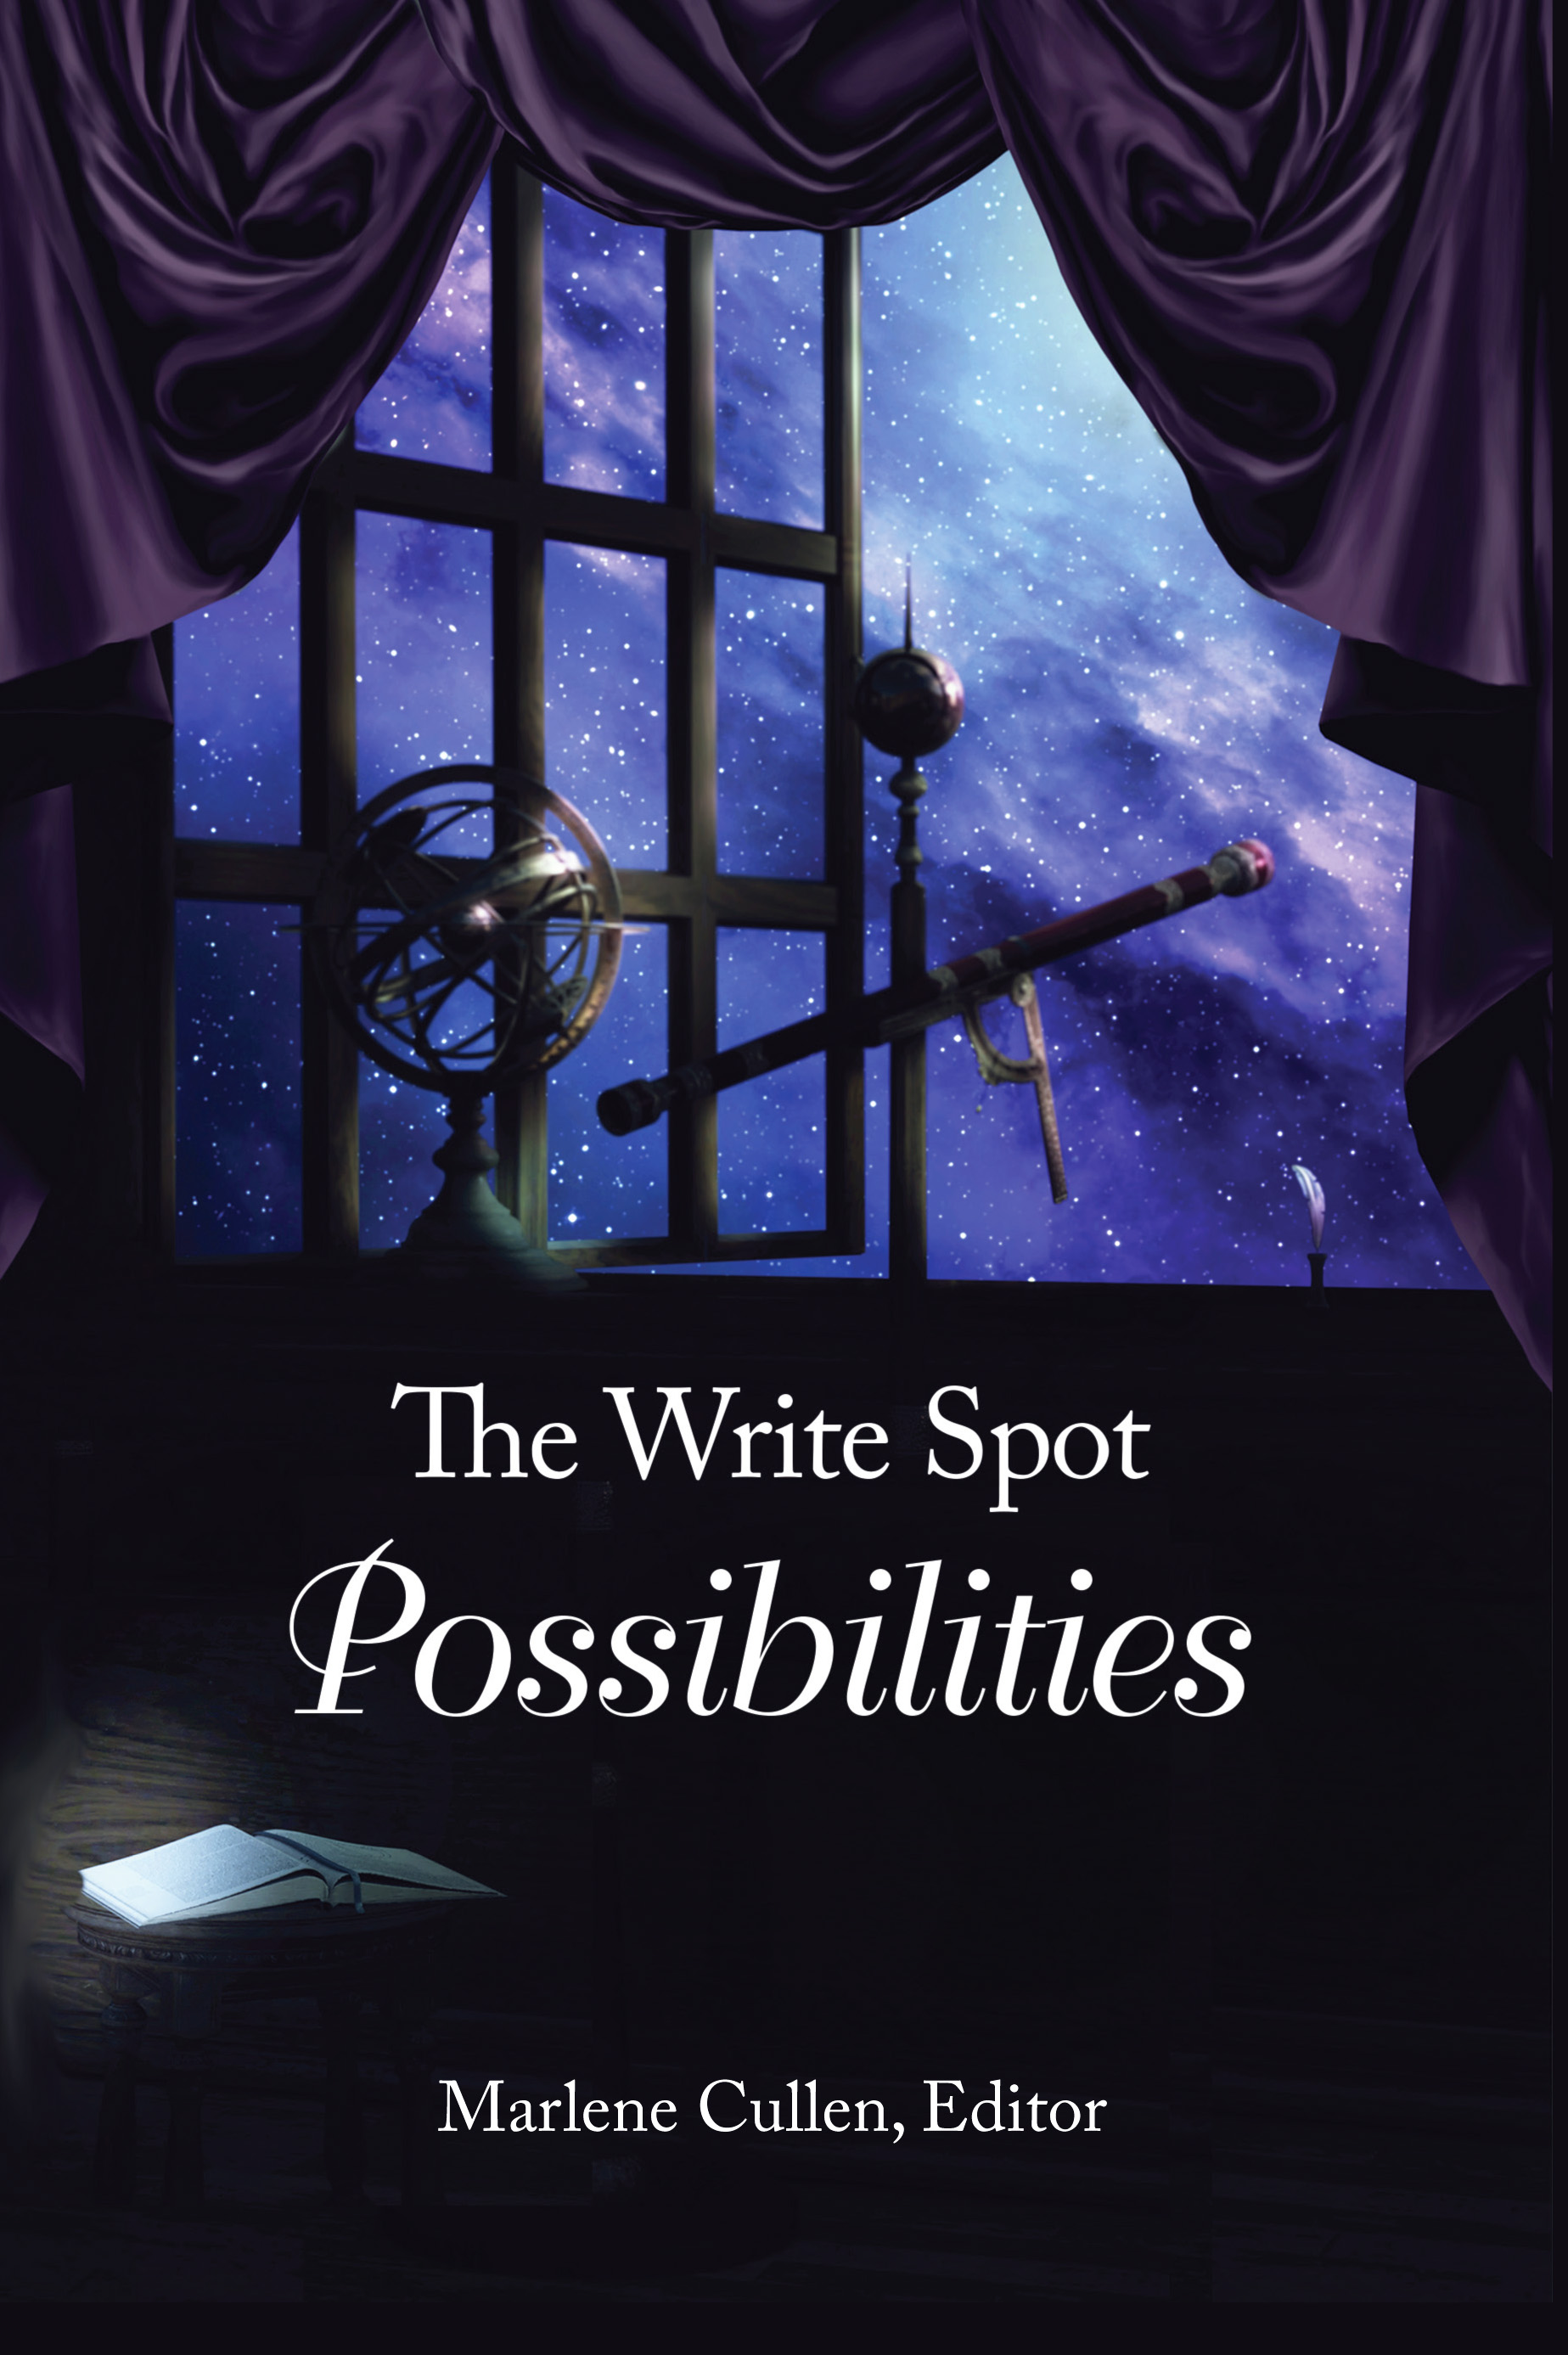 The Write Spot to Jumpstart Your Writing: Possibilities